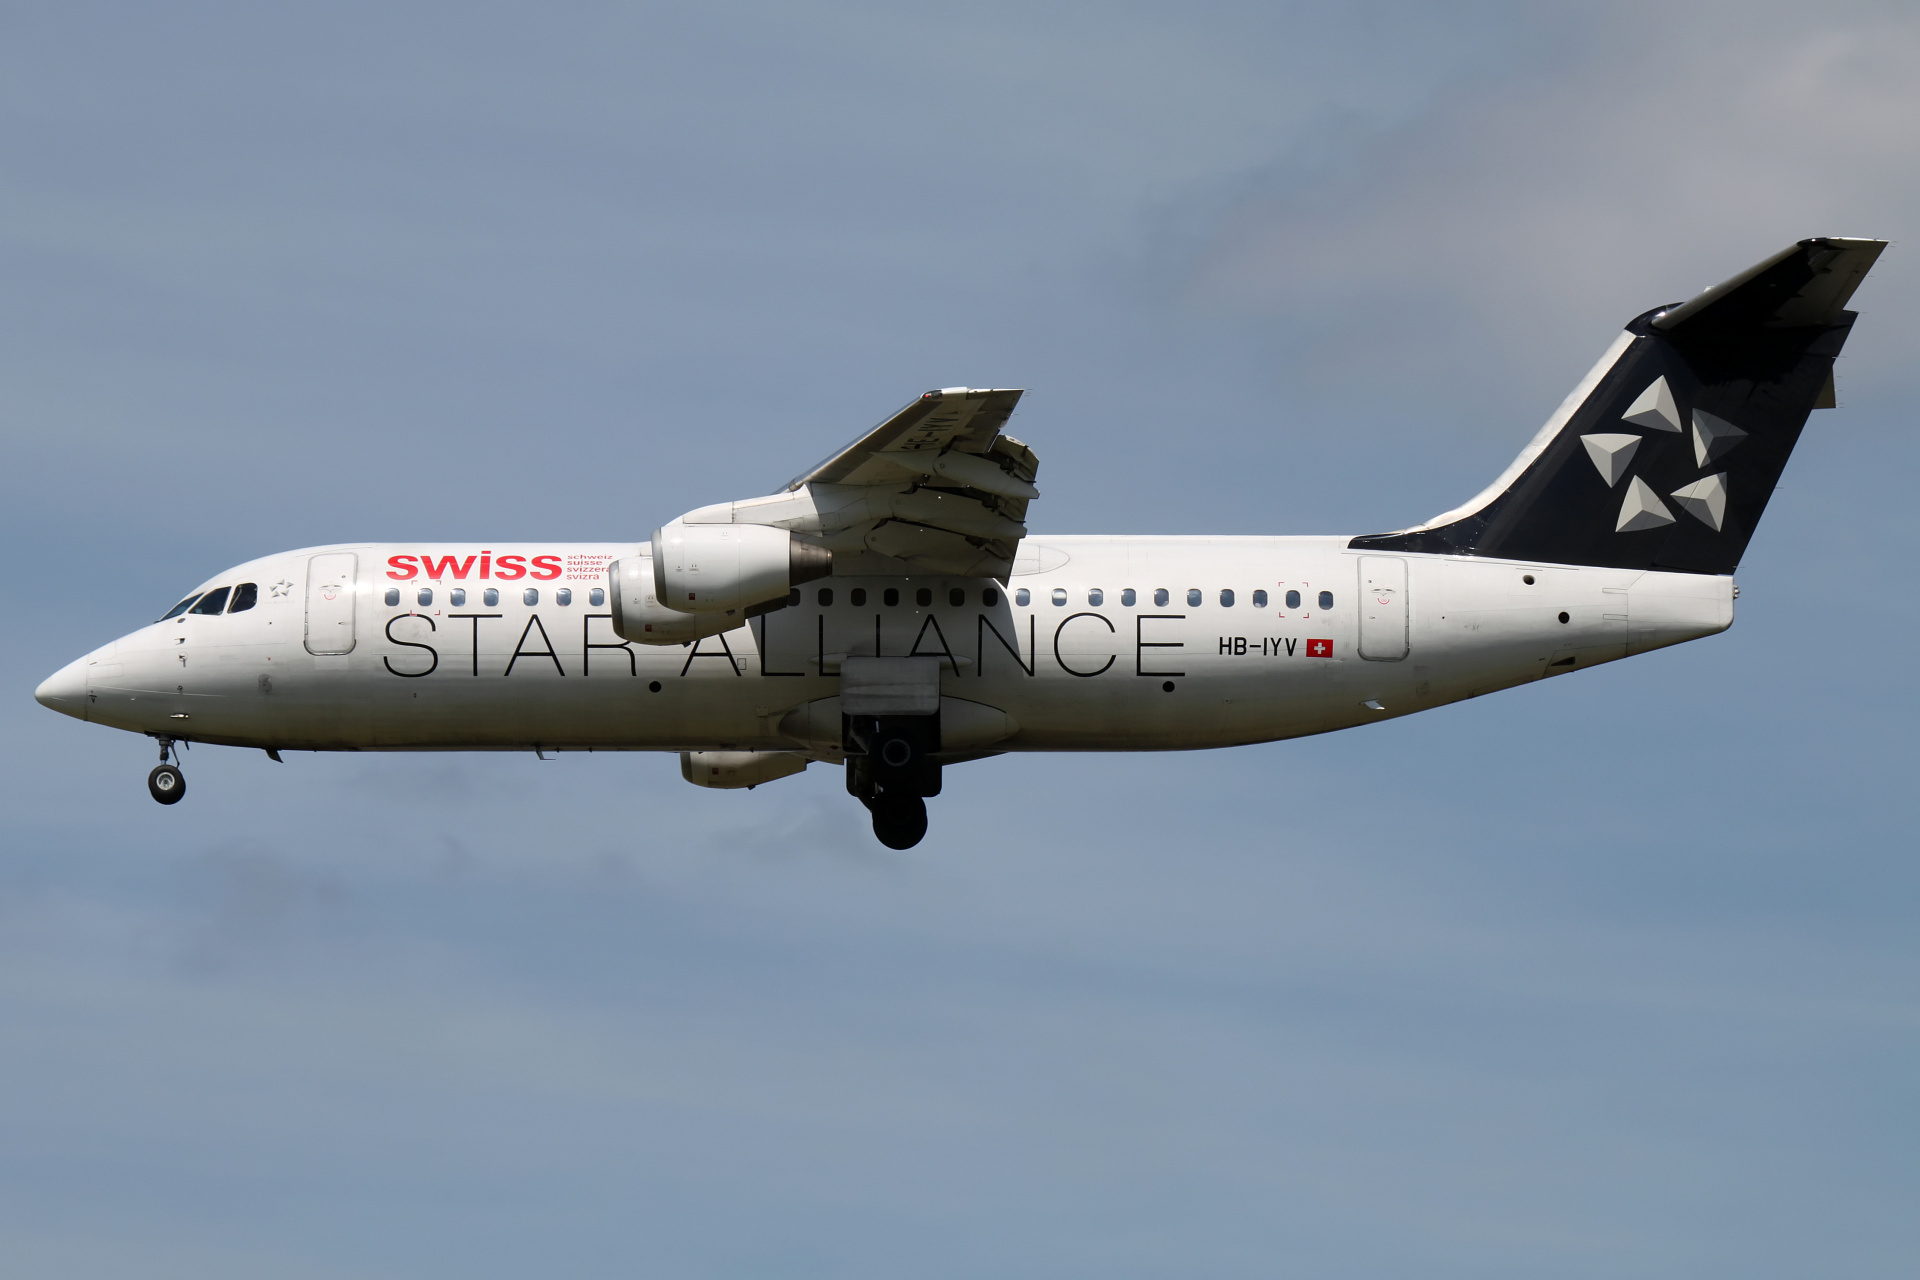 HB-IYV (Star Alliance livery) (Aircraft » EPWA Spotting » BAe 146 and revisions » Avro RJ100 » Swiss Global Air Lines)